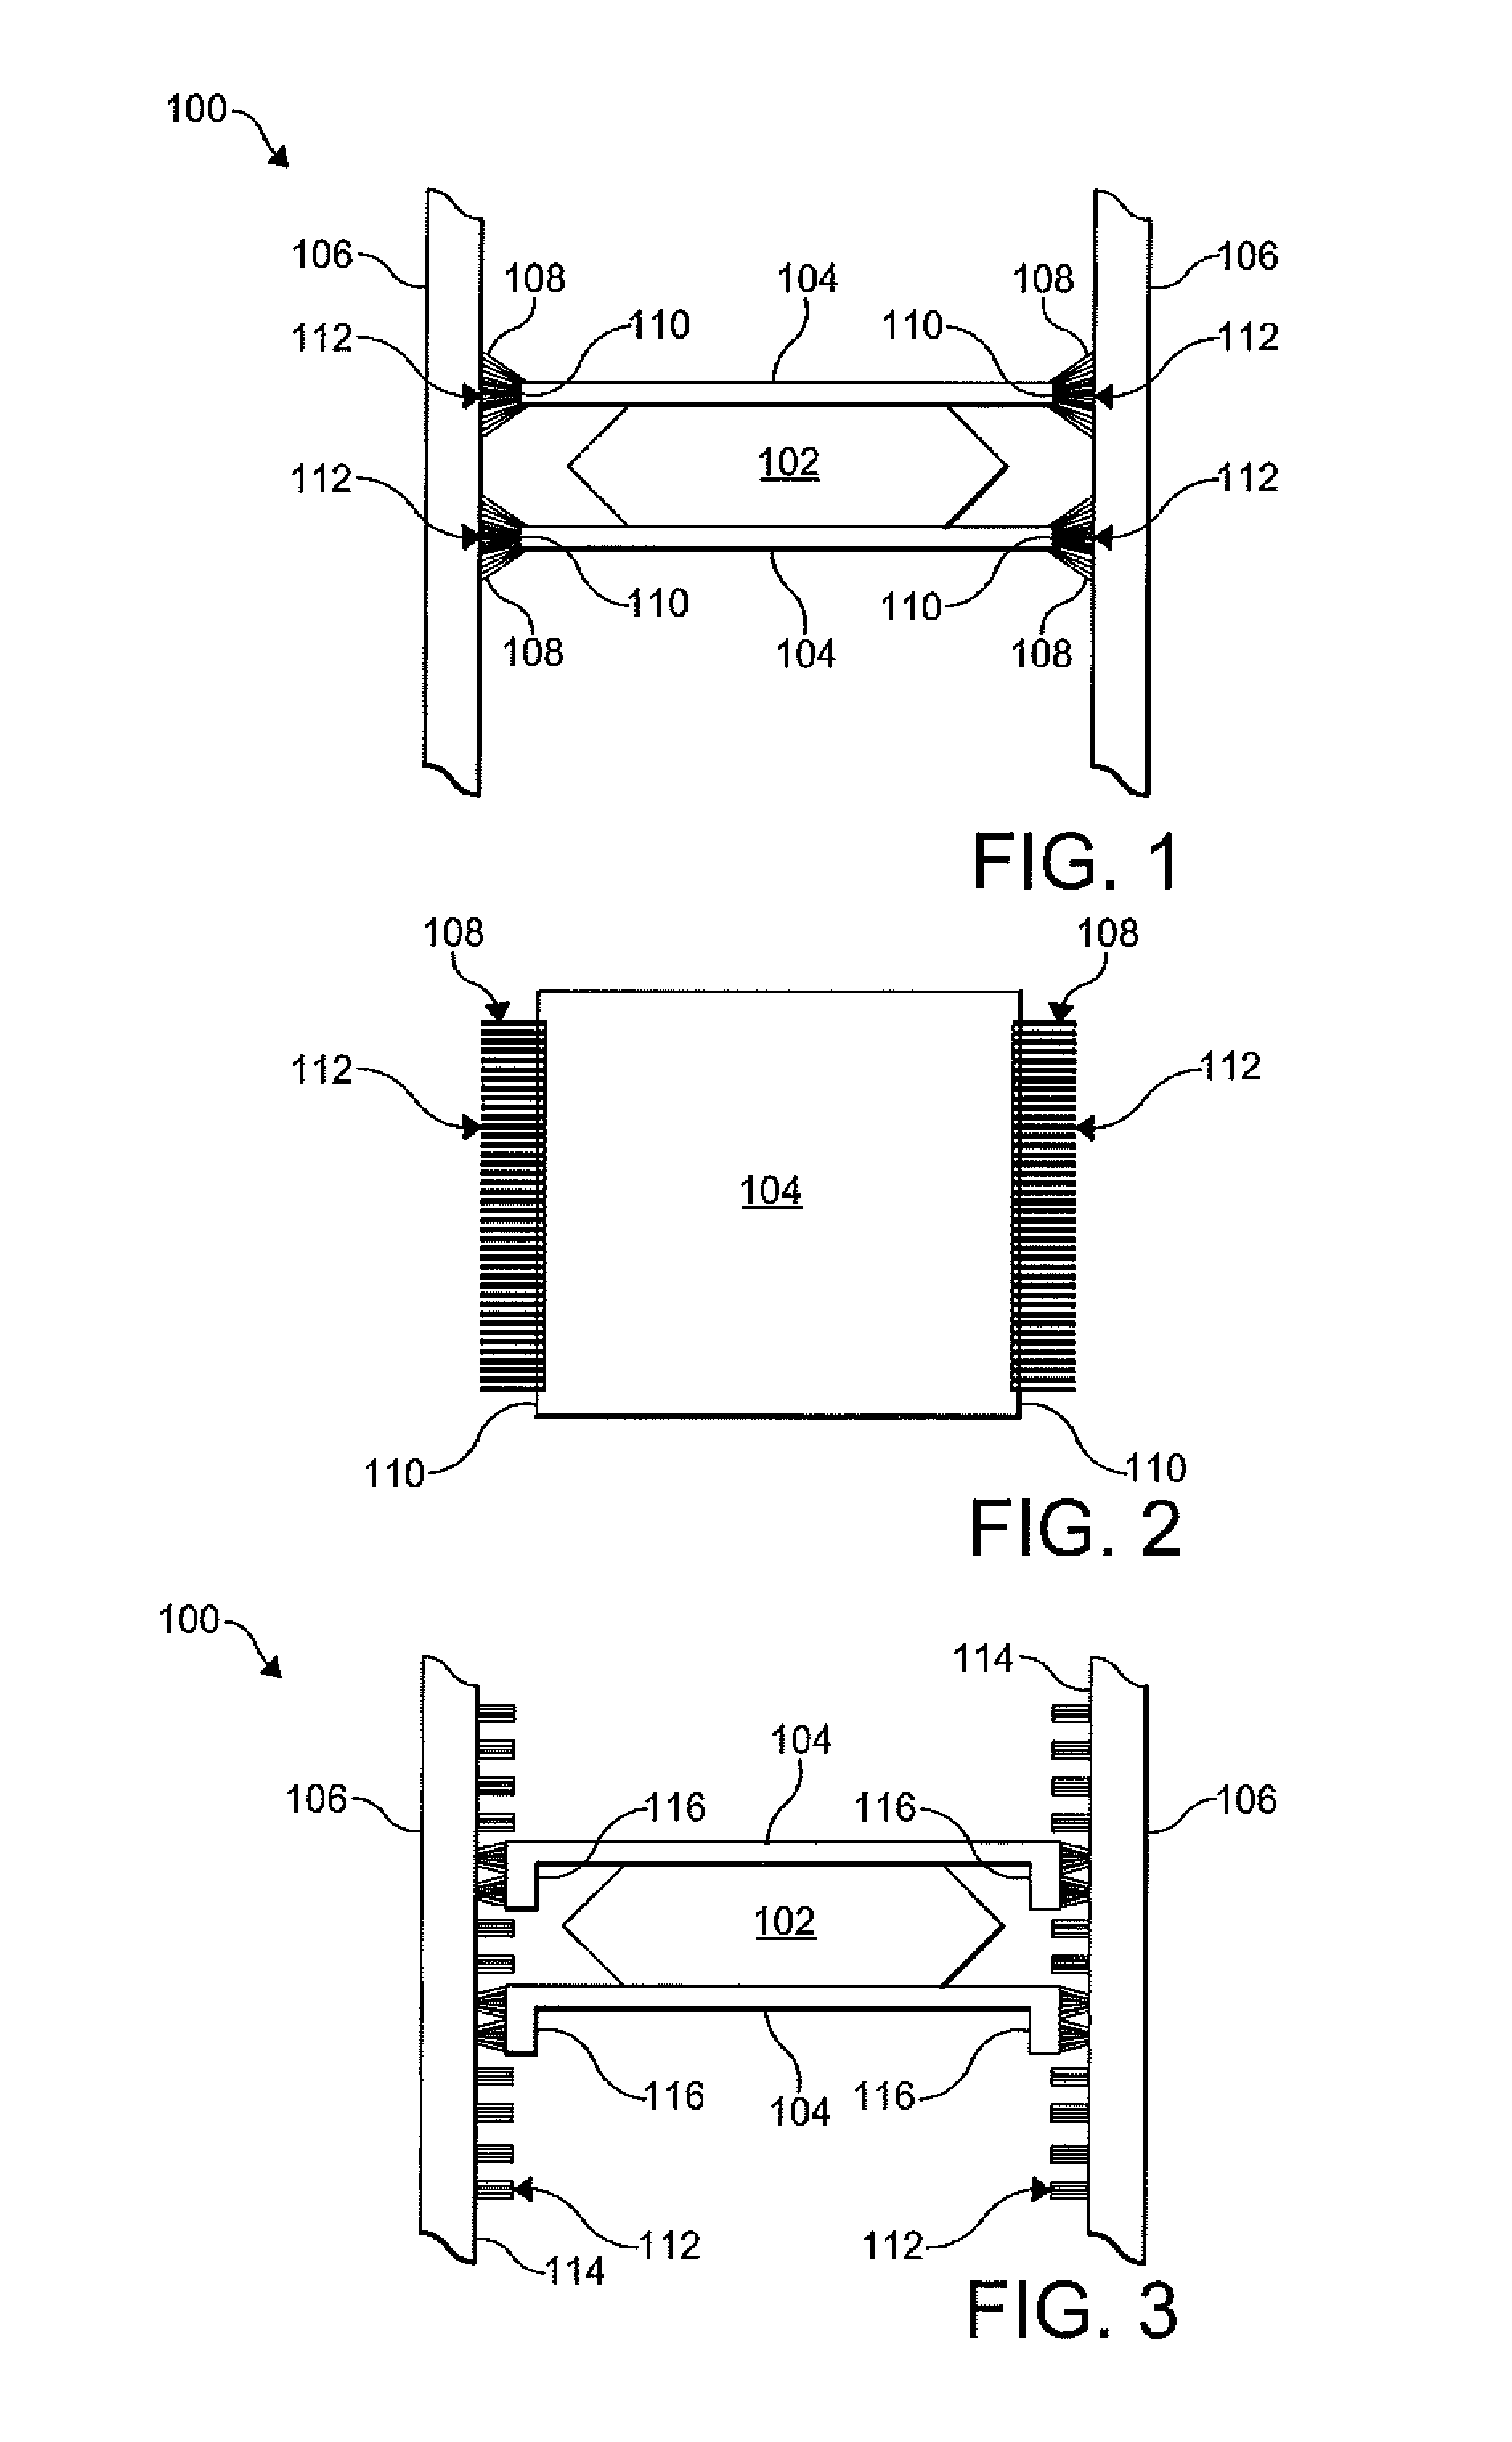 Carbon fiber thermal interface for cooling module assembly